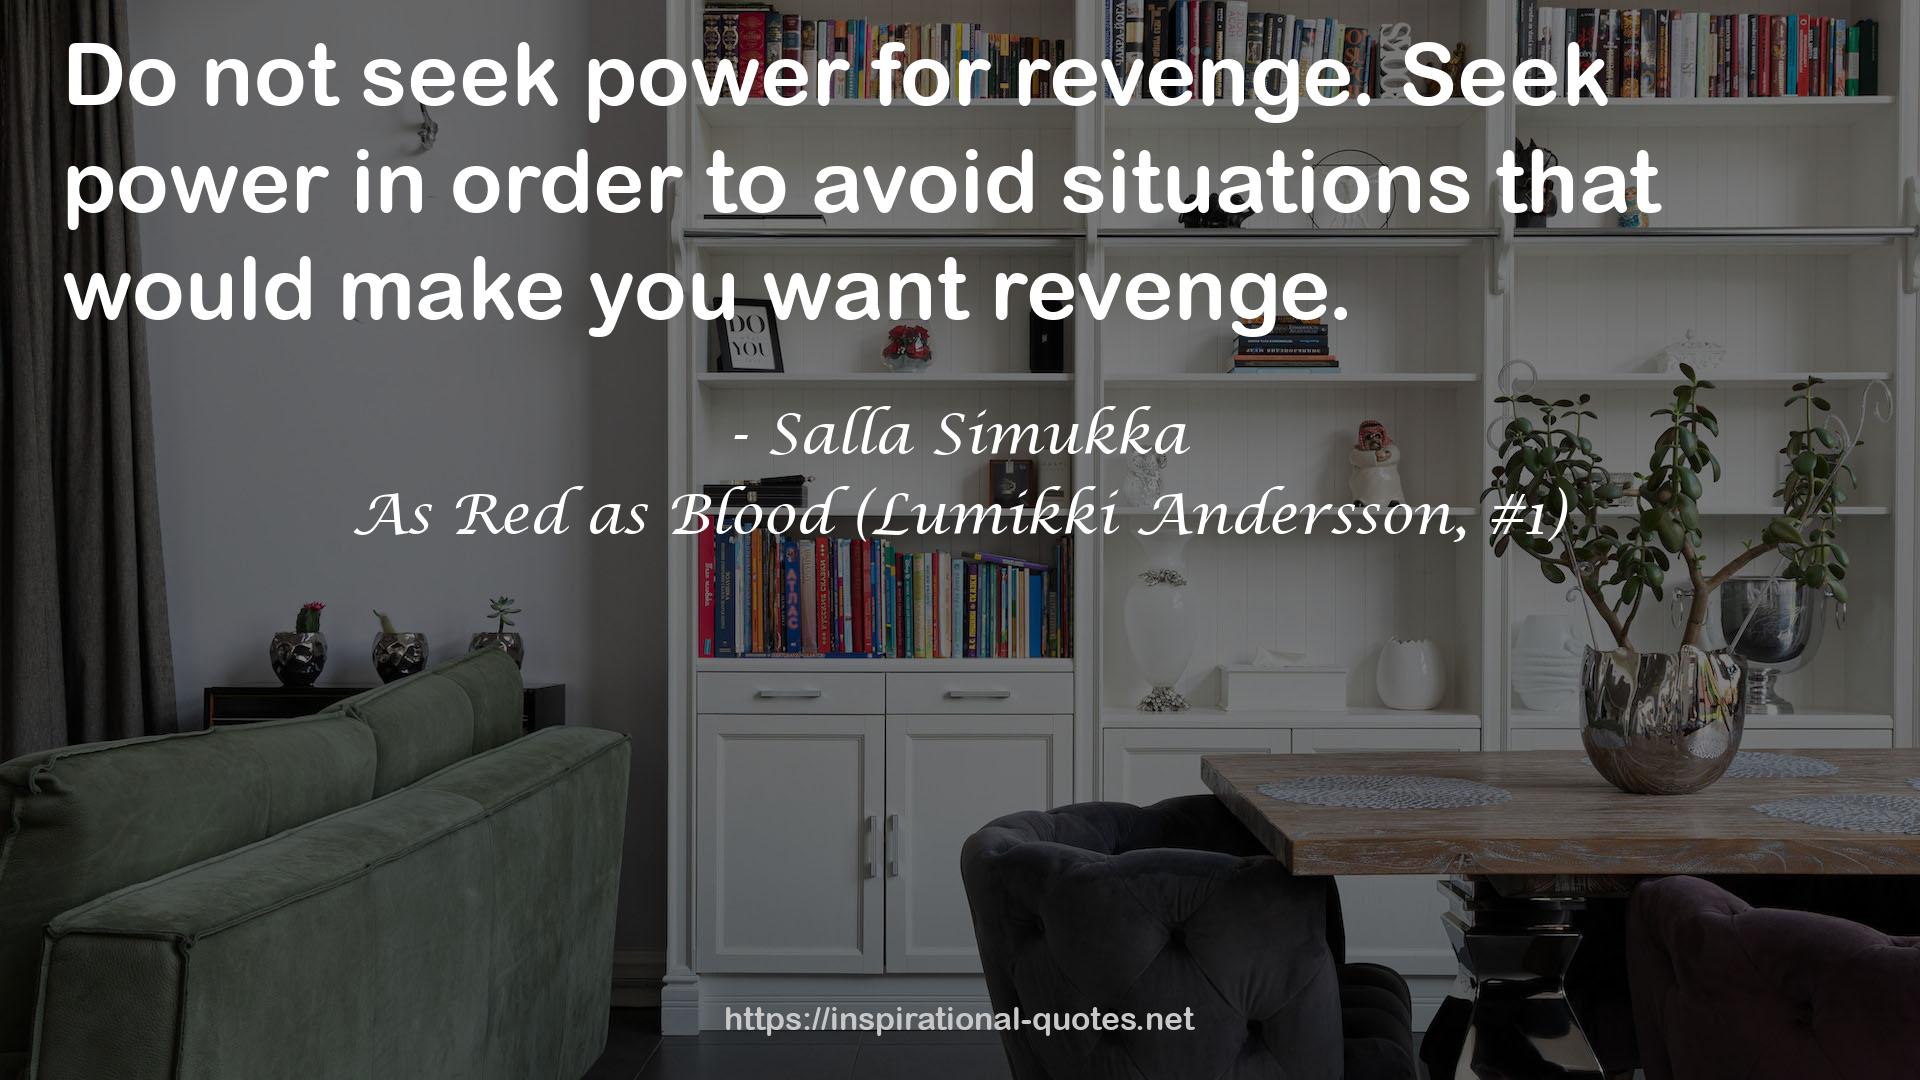 As Red as Blood (Lumikki Andersson, #1) QUOTES